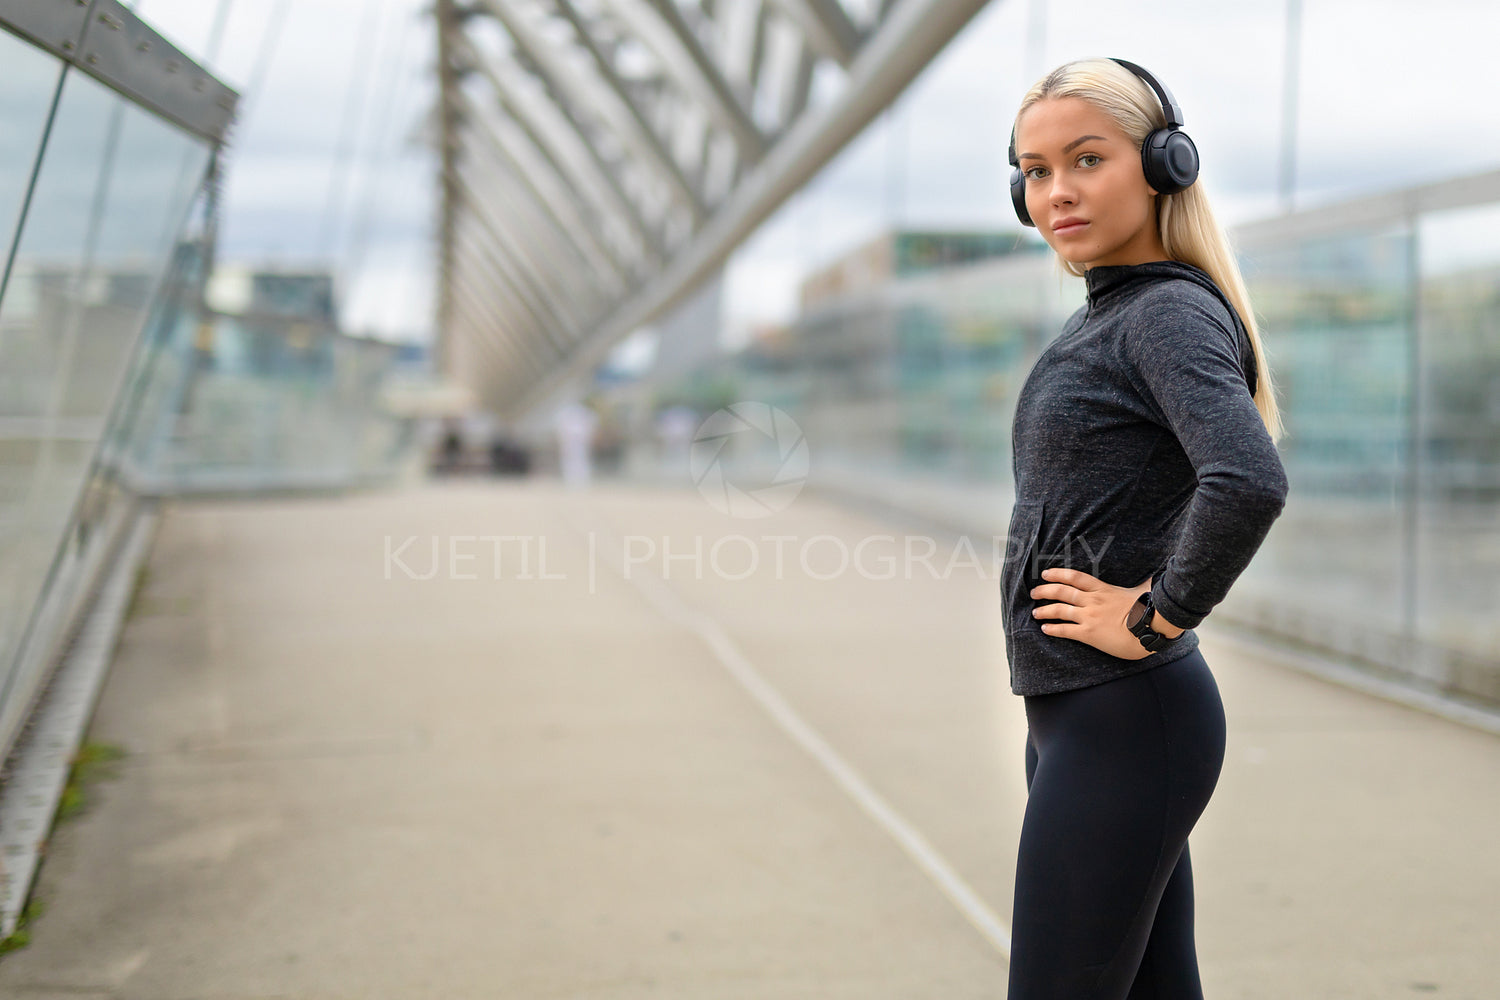 Smiling Woman in Black Workout Outfit Listen To Music on Headphones